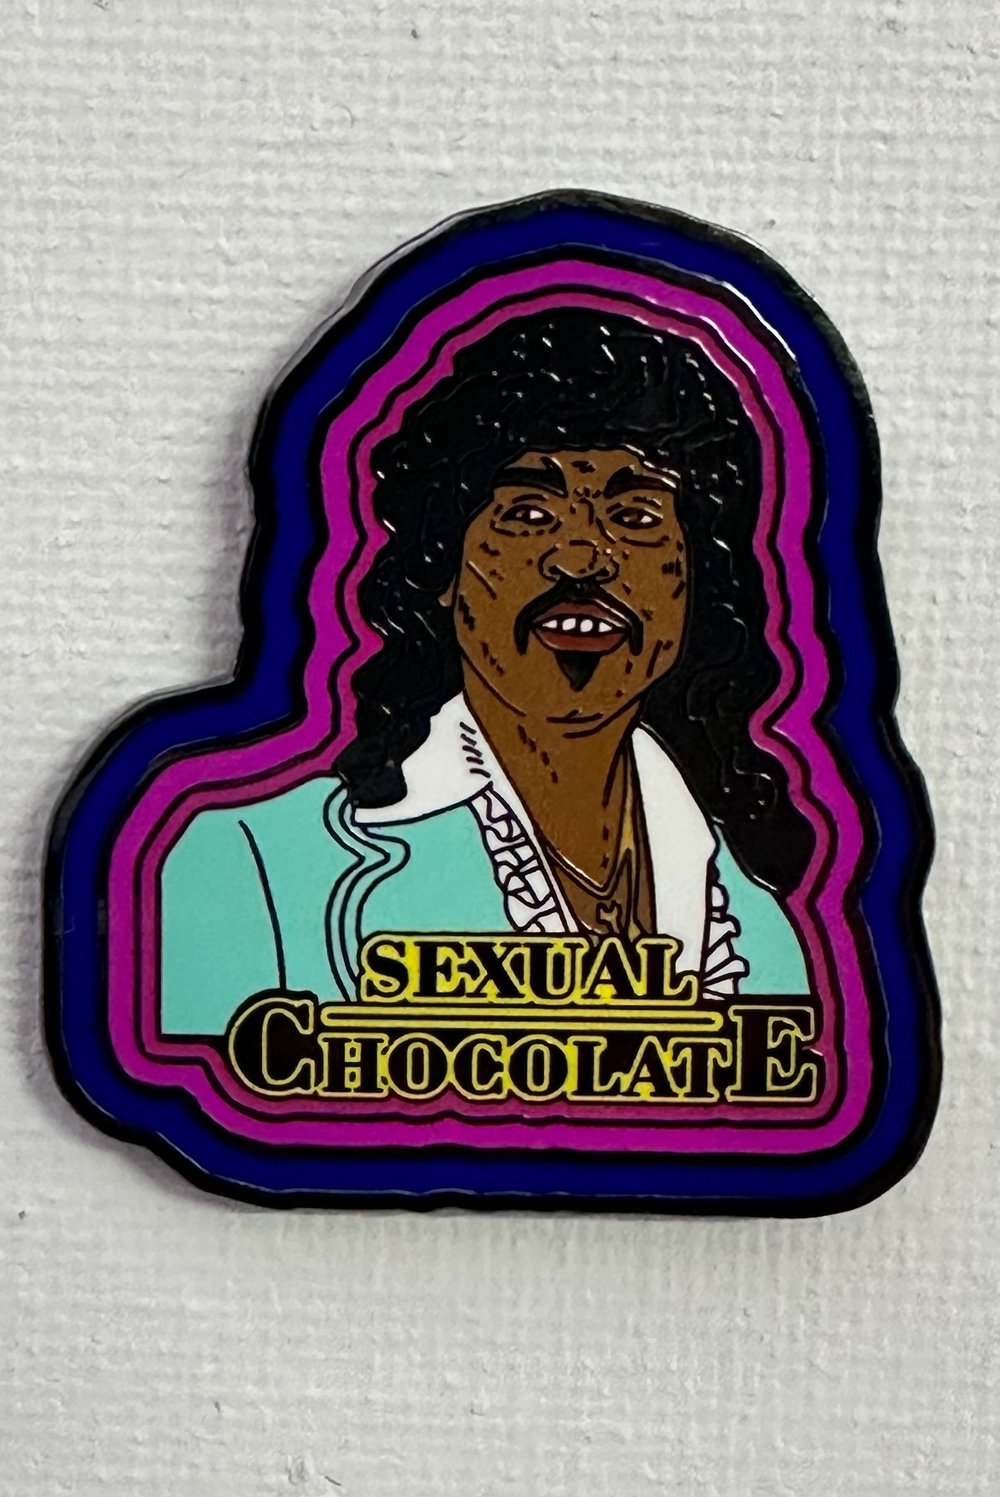 Sexual chocolate!!